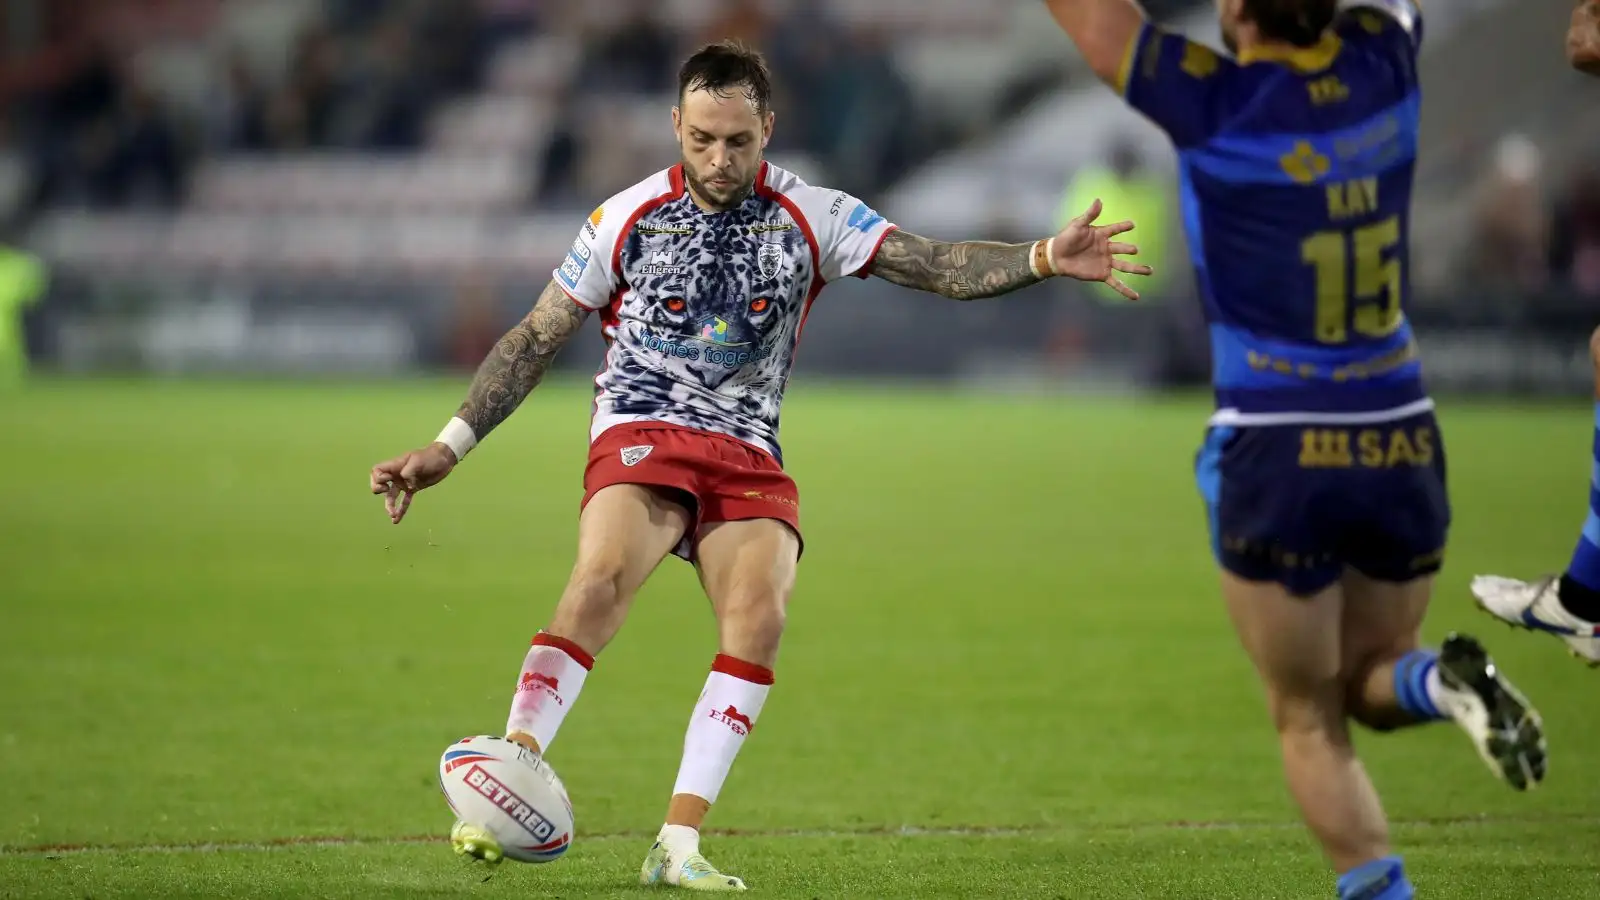 Movement at the top, Golden Point drama, Play-offs still hang in balance – What we know after Friday night’s Super League action